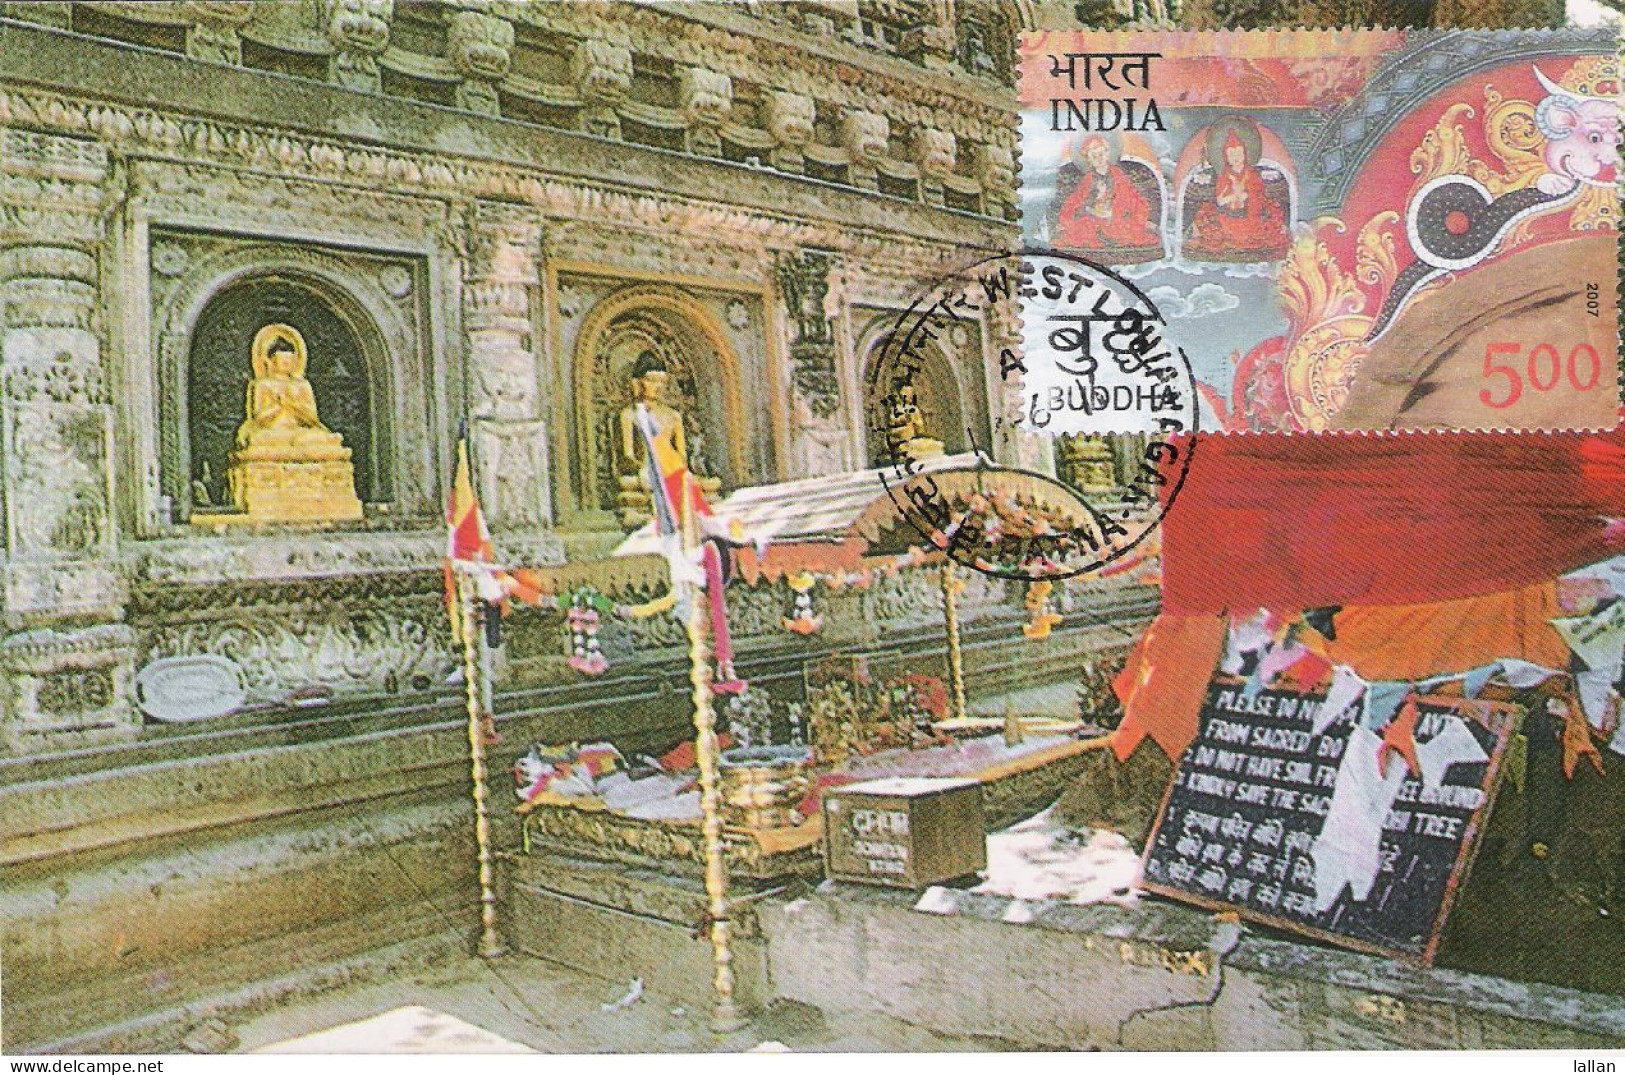 The Veneration Of The Vajranna, The Diamond Seat At Bodh Gaya, Used Postcard With Matching Stamp 2011 - Buddhismus